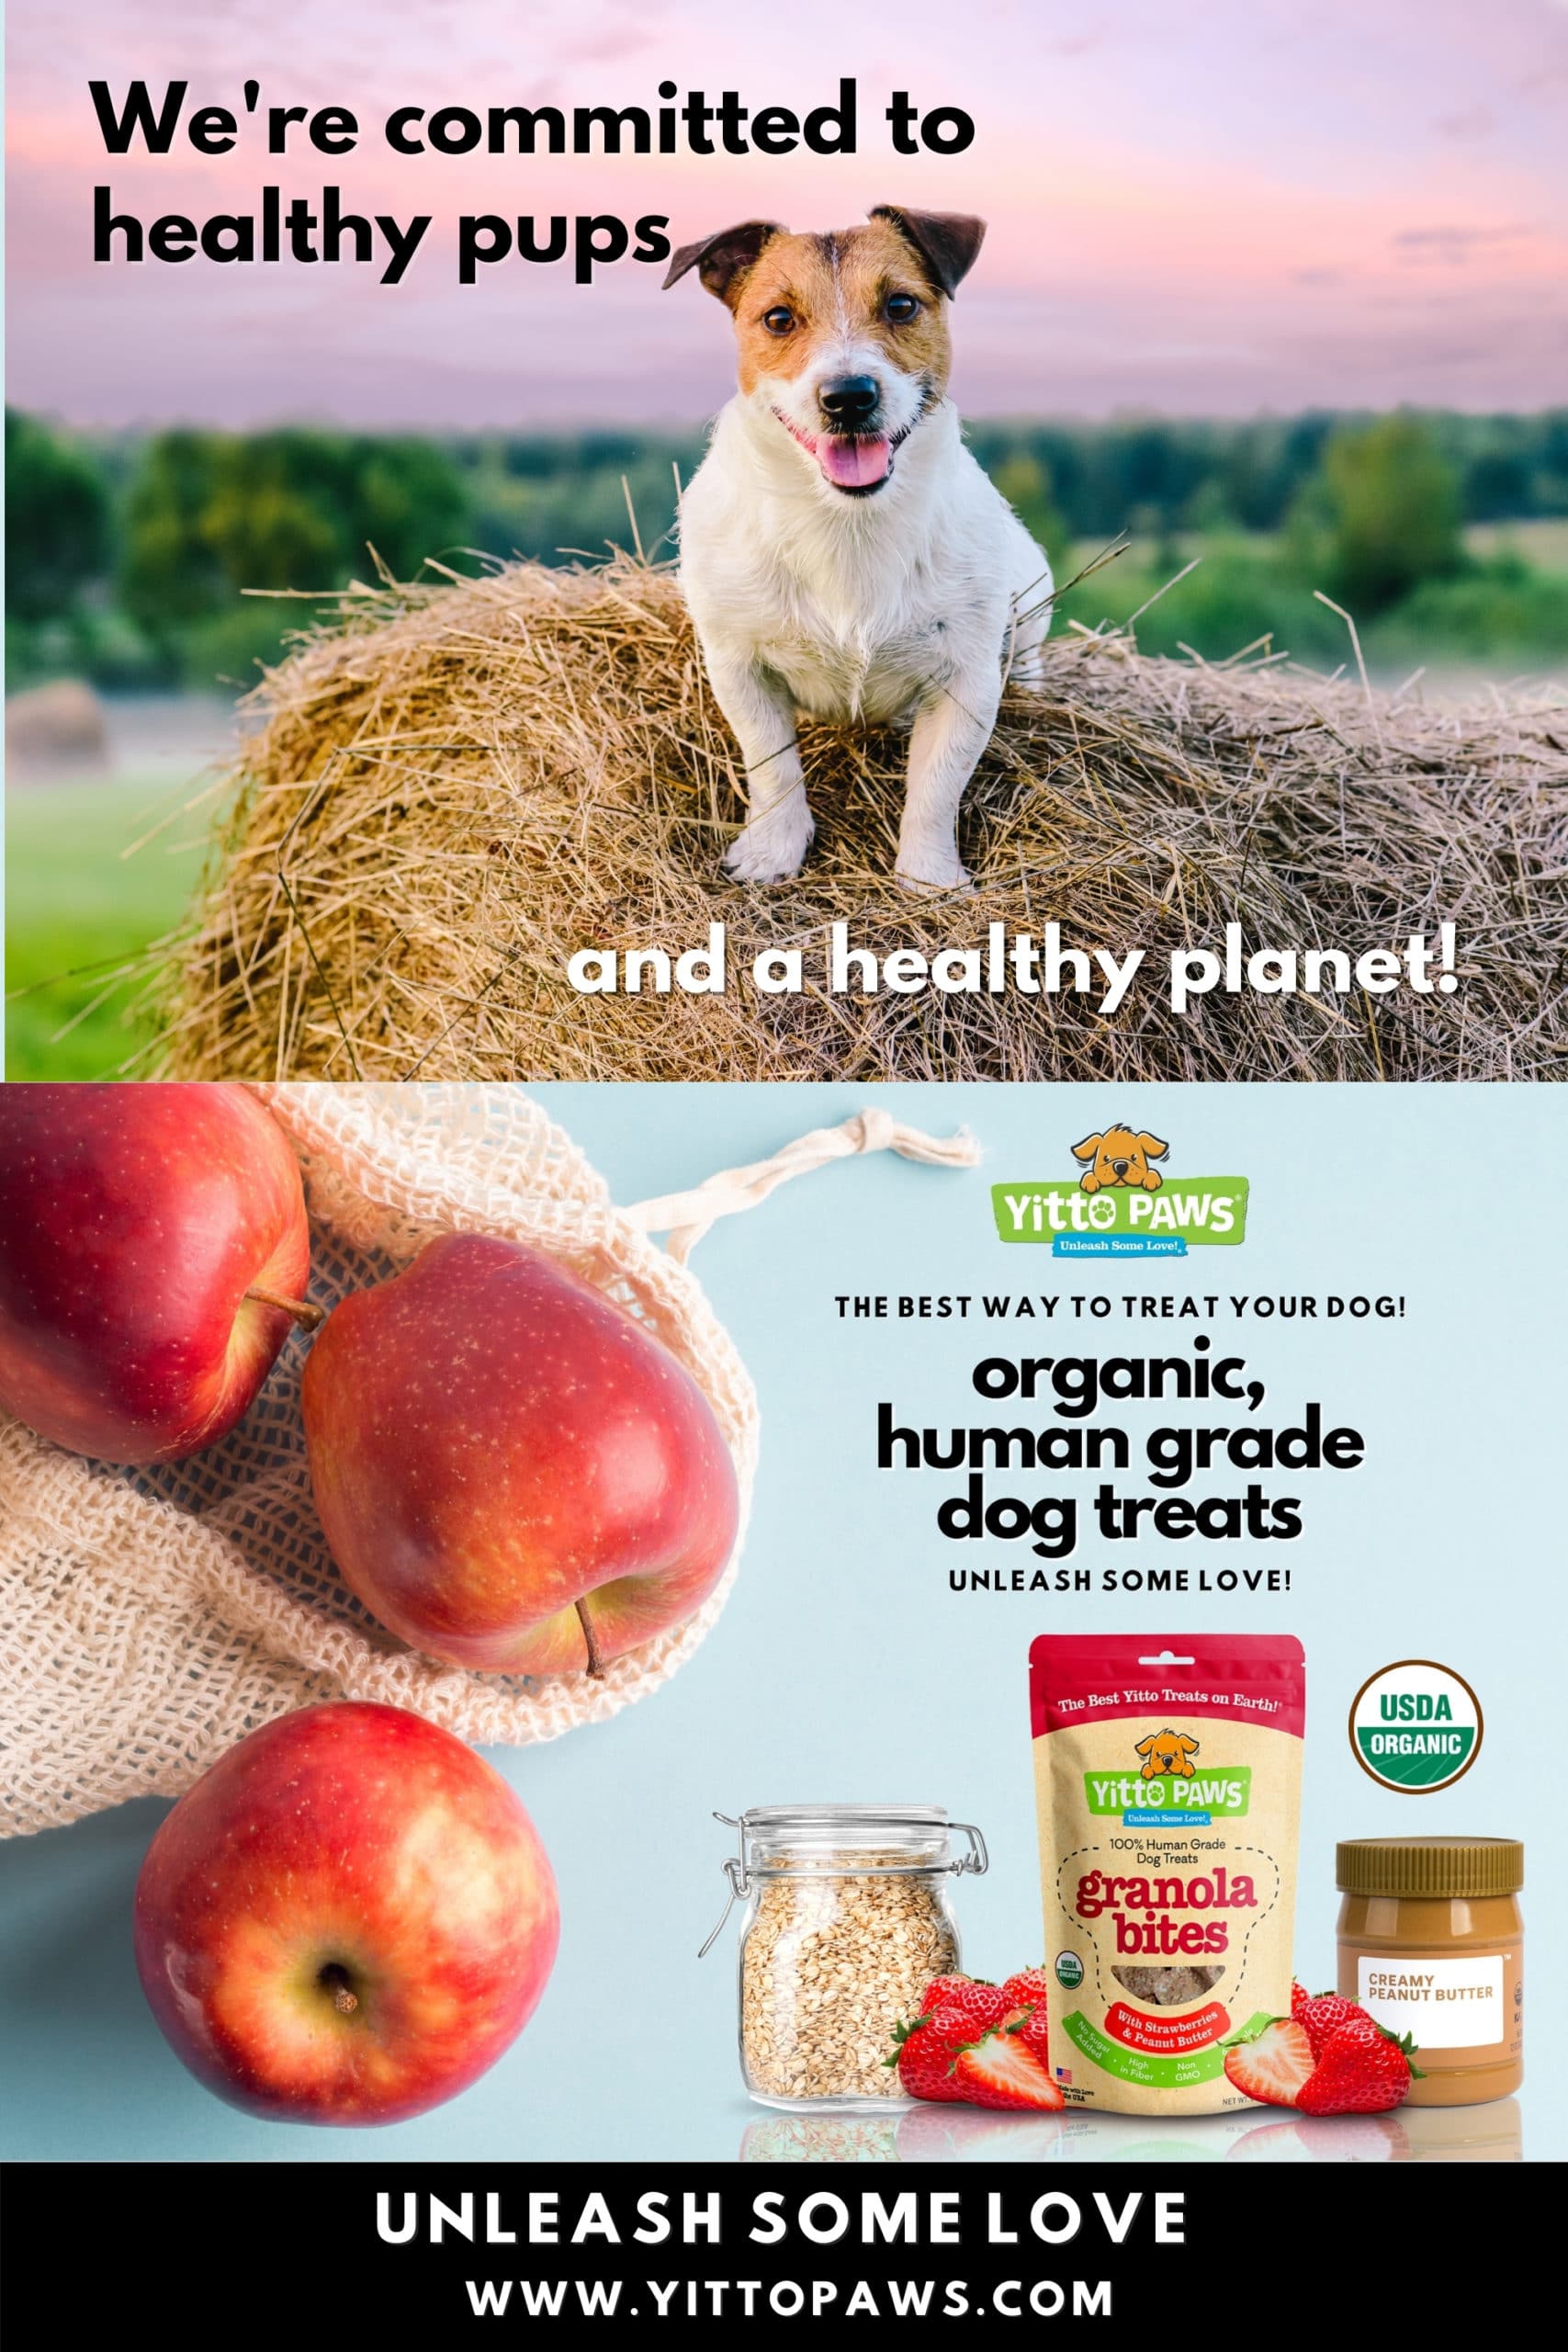 Supporting a Healthy Planet is central to all we do at Yitto Paws. We know our families and their dogs need a strong Mother Earth to thrive!